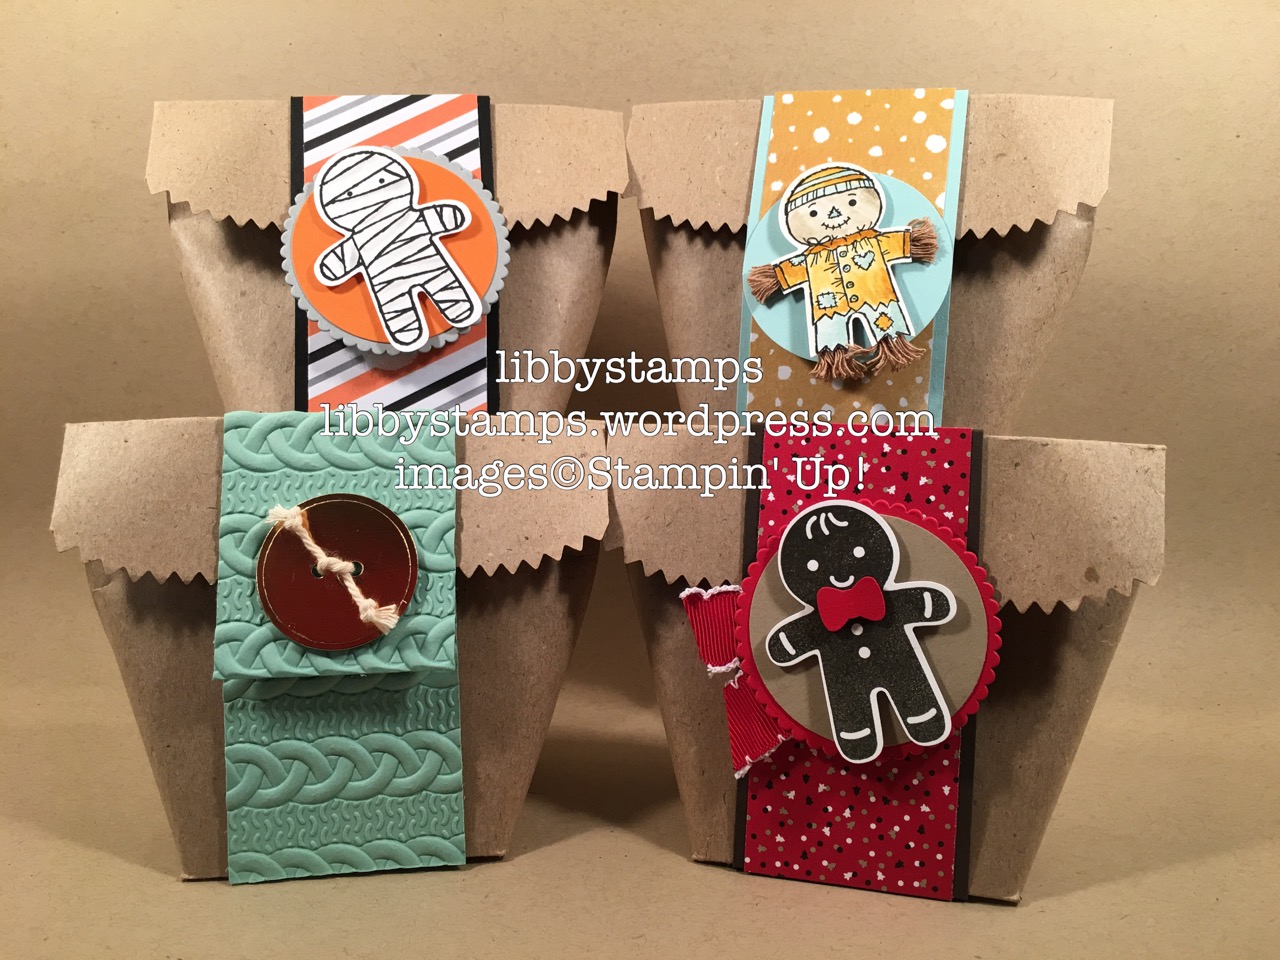 libbystamps, stampin up, Tag A Bag Gift Bags, treat bag, Blogging Friends Blog Hop, Cookie Cutter Christmas, Cookie Cutter Halloween, Cookie Cutter Builder Punch, Layering Circles Framelits 